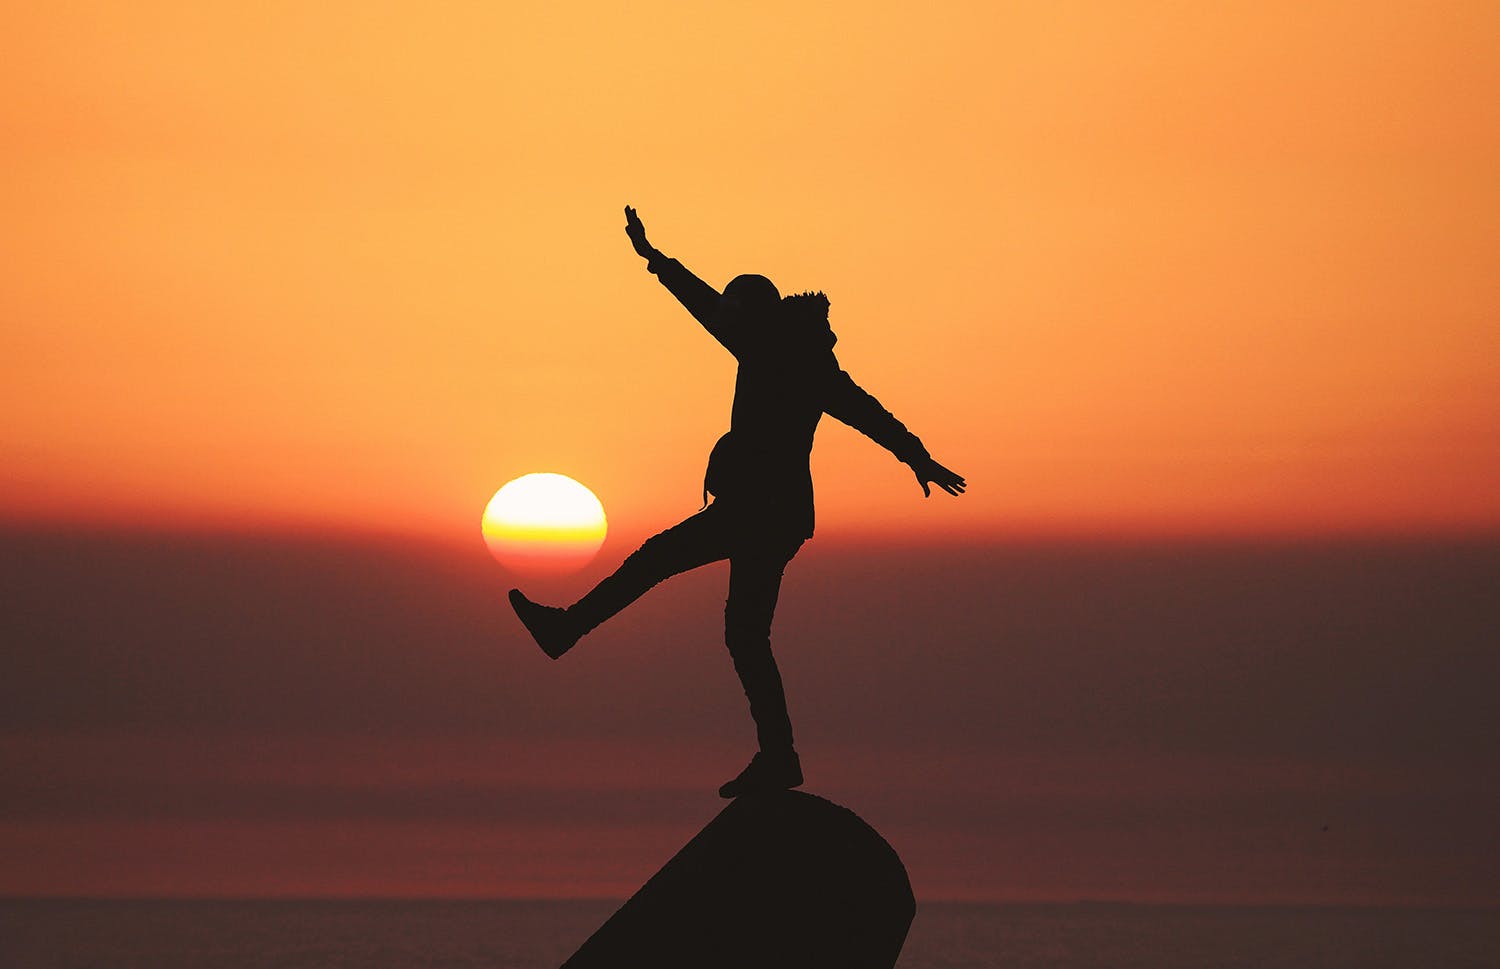 Photo of a person balancing on a rock, with the sunset behind them.